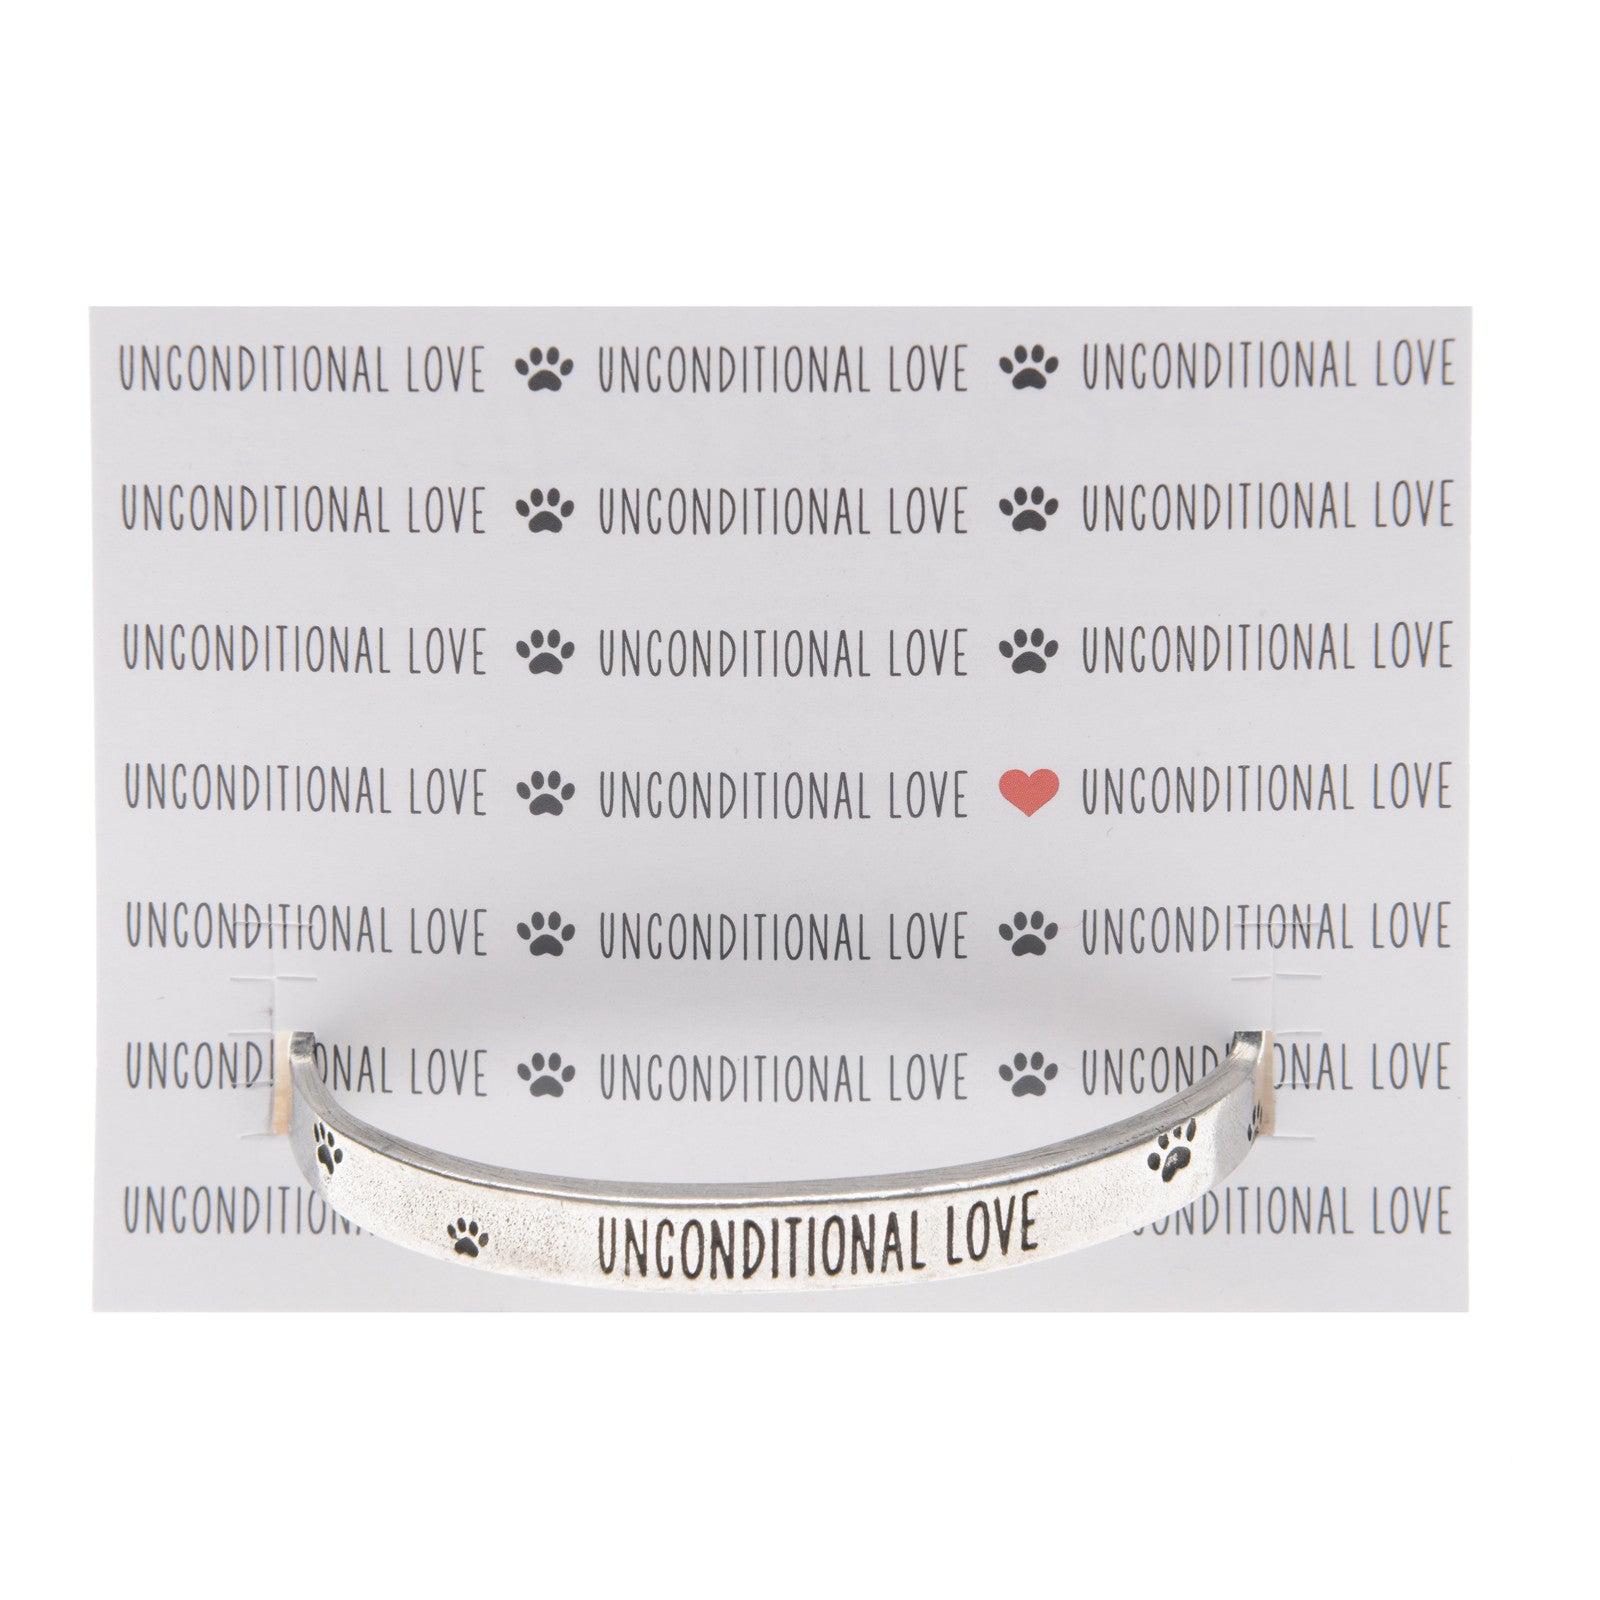 Unconditional Love Cuff Inspirational Jewelry Bracelet on backer card - Pet Sympathy Gift or Memorial by Quotable Cuffs